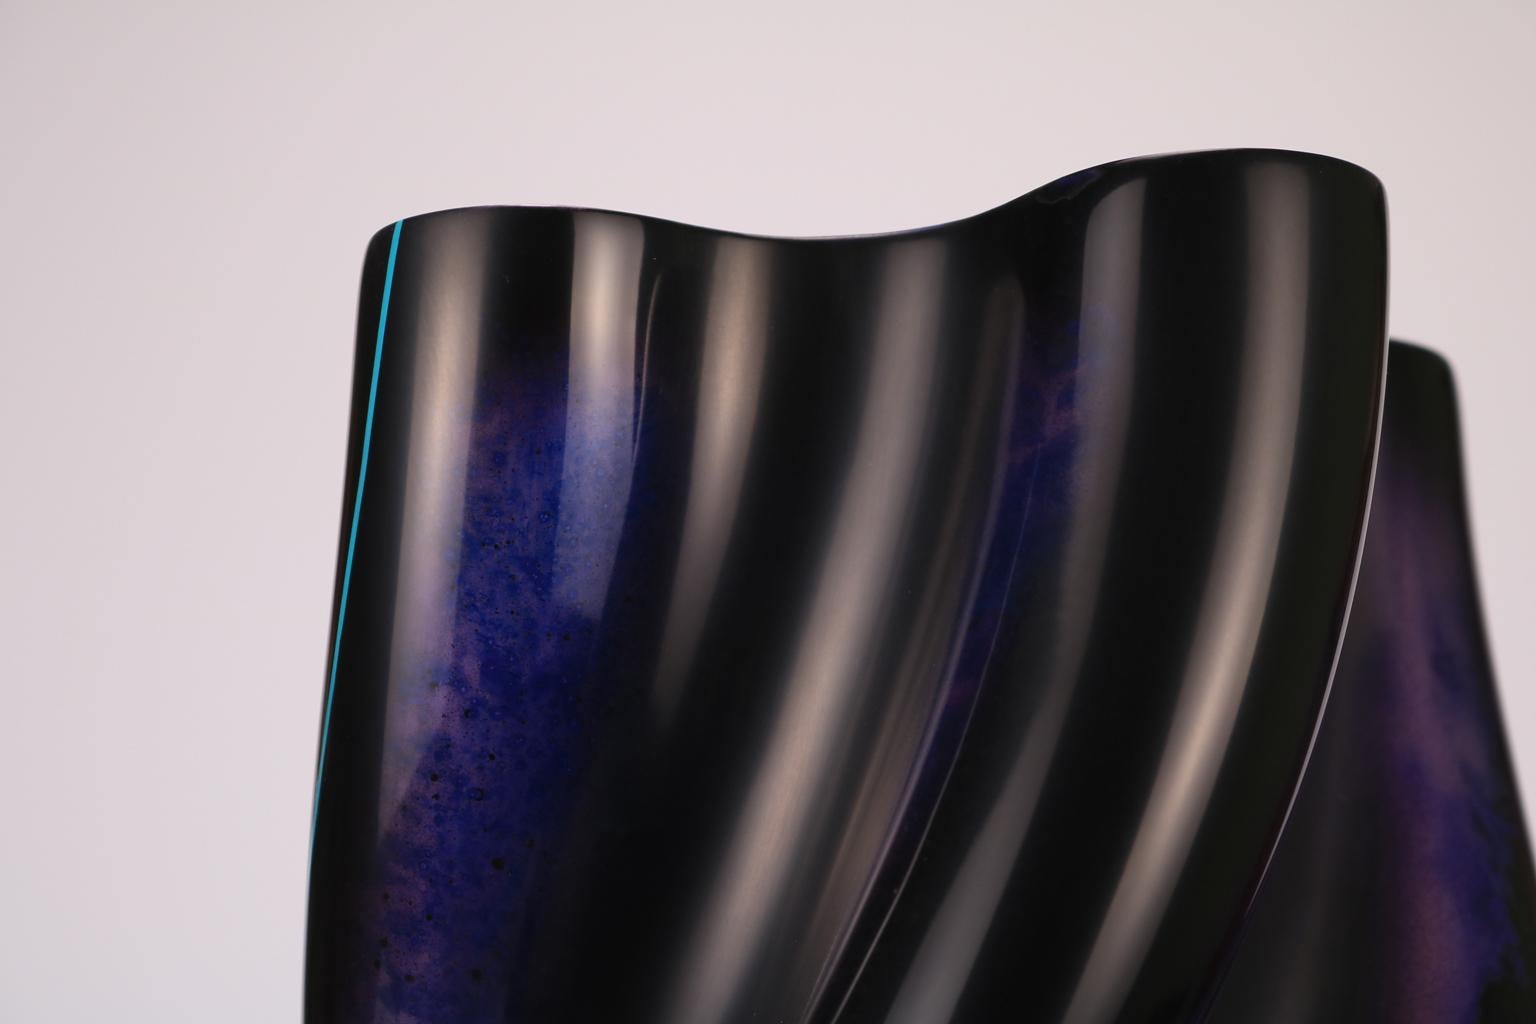 Voluptuous four lobe lacquered ceramic vessel, the four lobe vessel is a decorated and lacquered version of the three lobe twin vessel selected in 2016 as finalist at the Taipei International Ceramic Biennale Competition. The decoration of the